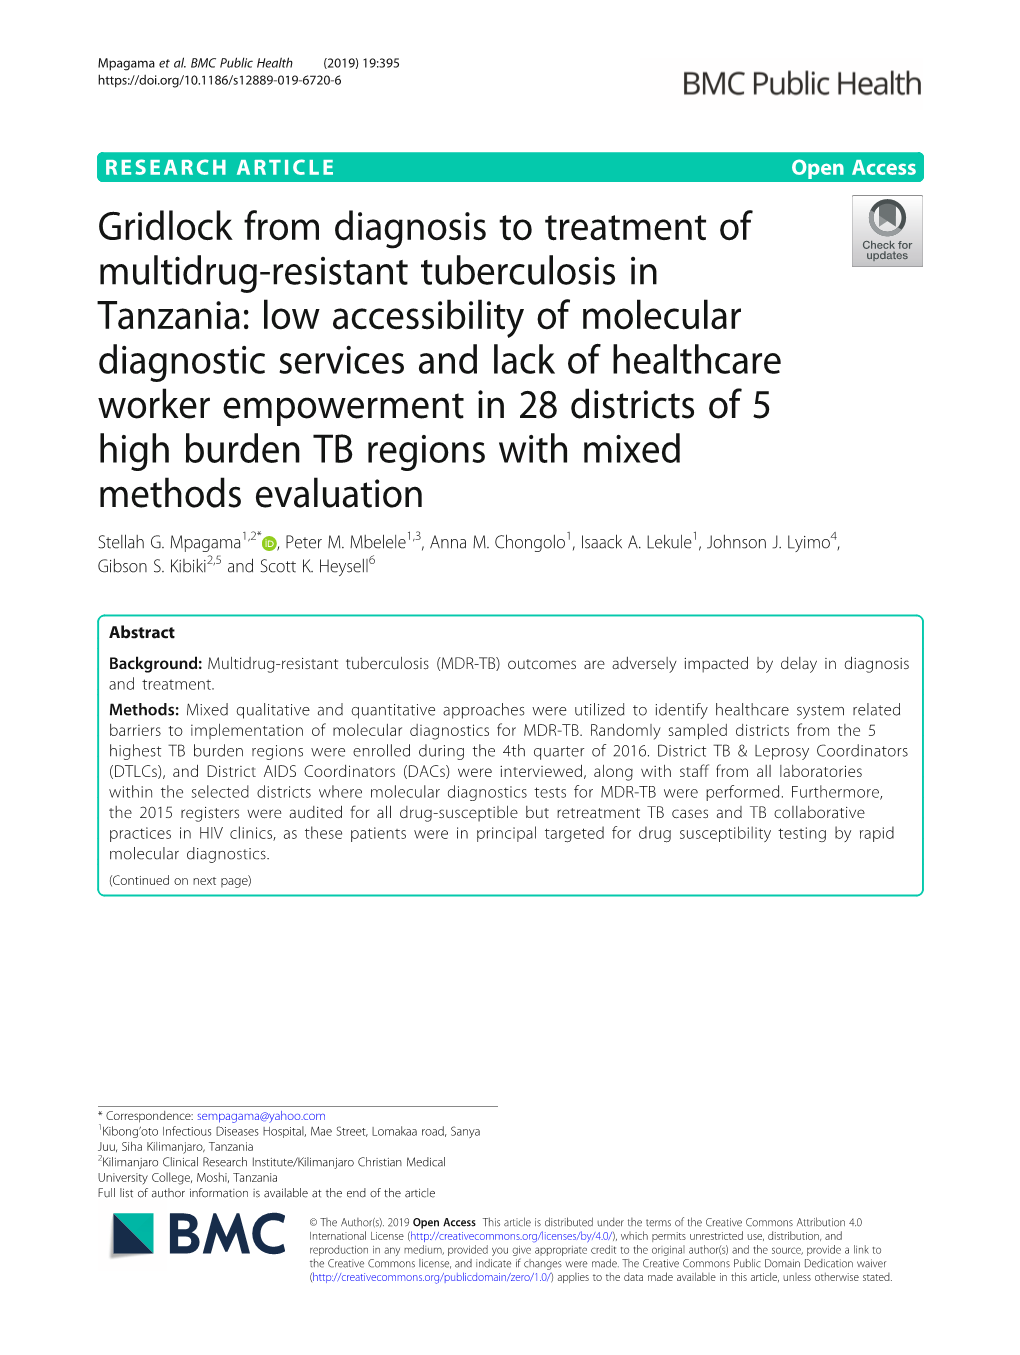 Gridlock from Diagnosis to Treatment of Multidrug-Resistant Tuberculosis In